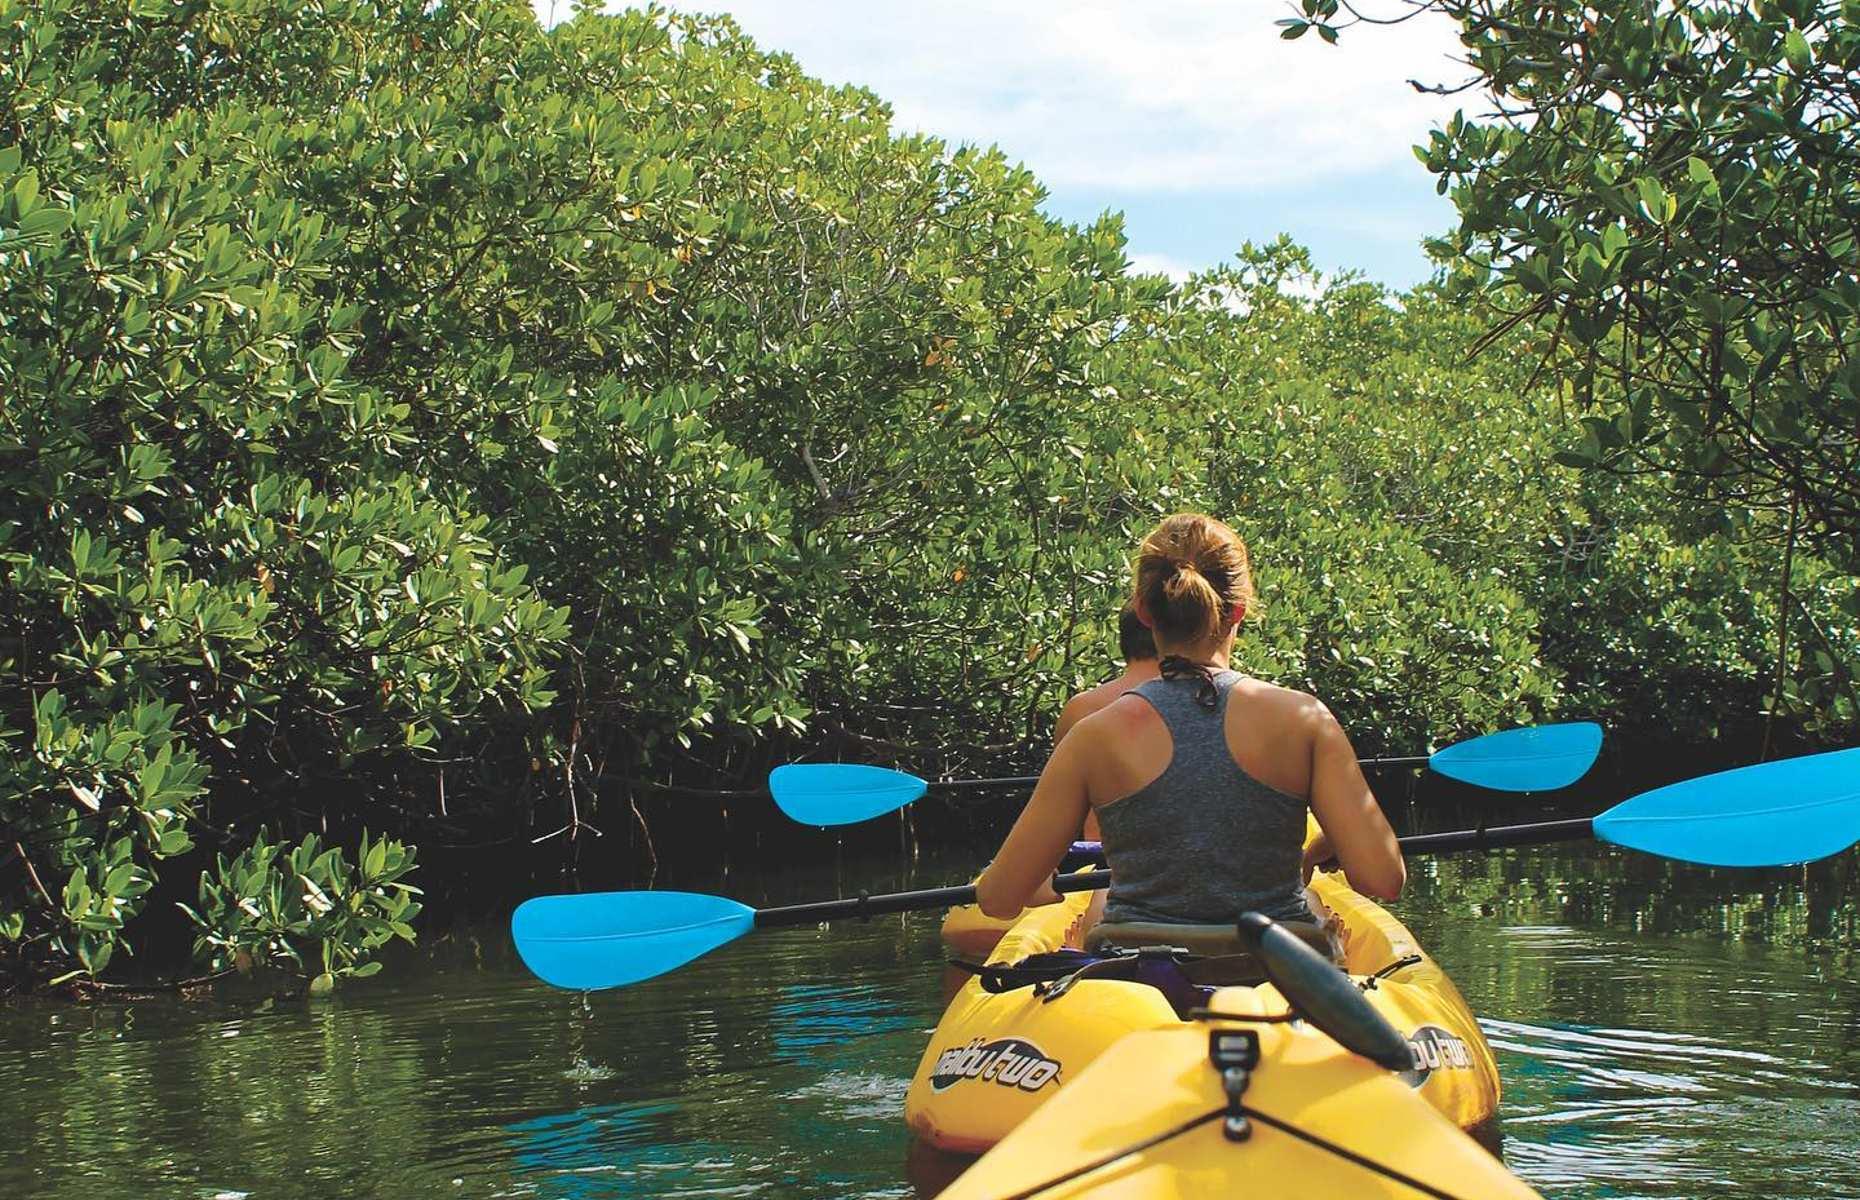 <p>The otherworldly emerald waters of Key West’s mangrove islands can be explored in a variety of ways. But whether you choose stand-up paddleboarding, snorkeling, sailing or kayaking, keep things green by booking with Key West Eco Tours. A family-run provider with a passion for preserving the local ecosystem, the company gets all guests to participate in a five-minute clean-up during their visit, while it also runs several clean-up days throughout the year and hires marine science students at Florida Keys College to help create its unique tours. </p>  <p><a href="https://www.loveexploring.com/galleries/109043/ranked-floridas-most-beautiful-small-towns-and-cities"><strong>Now check out Florida's prettiest small towns you must visit</strong></a></p>